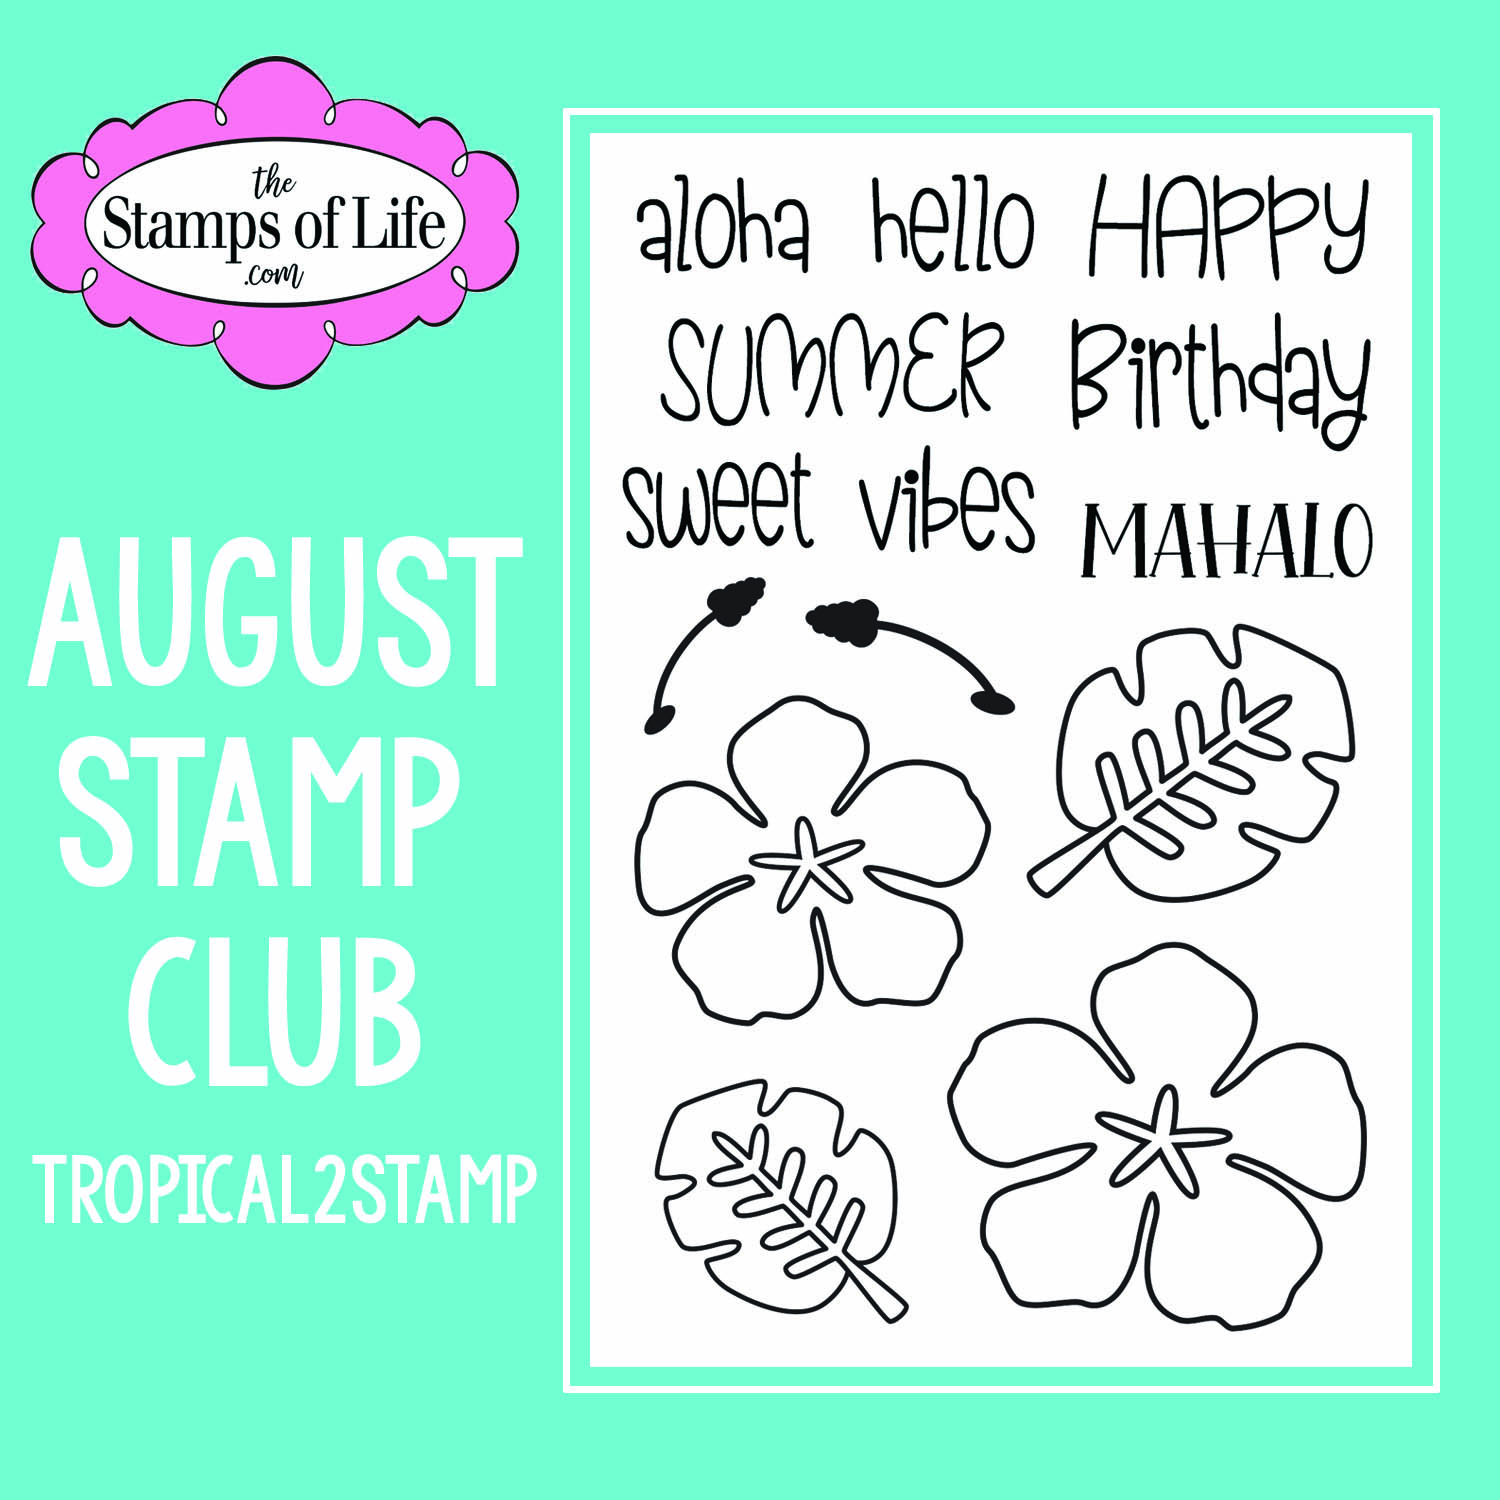 stamps of life club